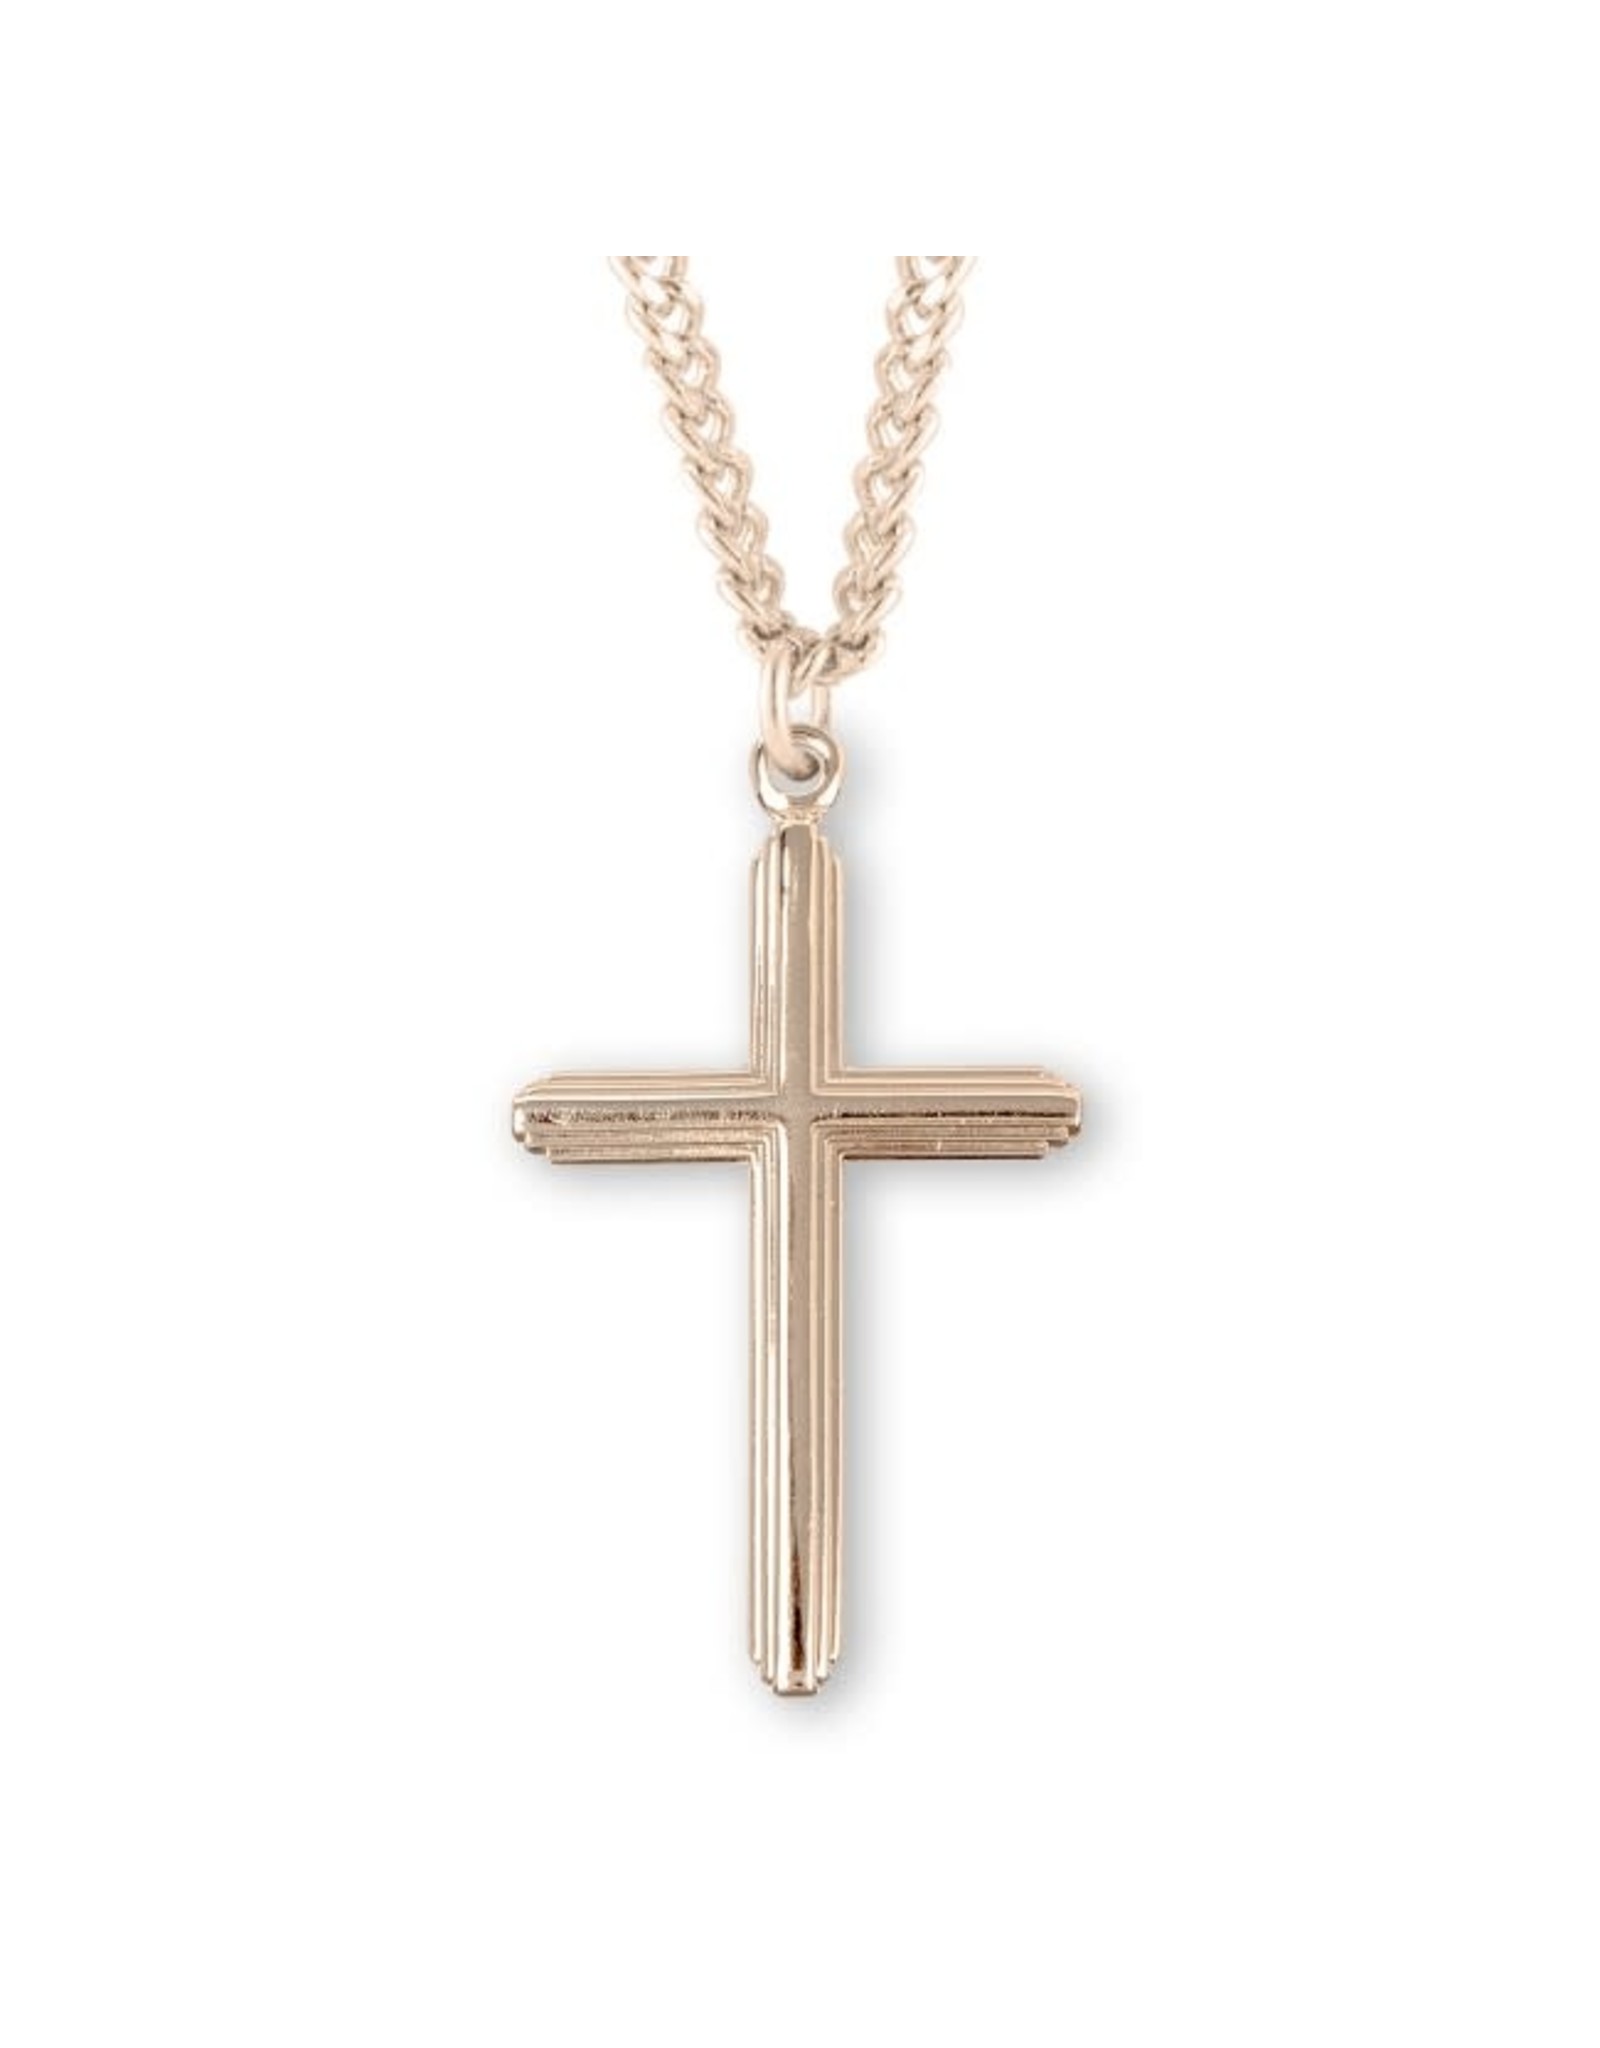 HMH 16 Karat Gold Over Sterling Silver Inlayed Cross on 20” Chain, Boxed